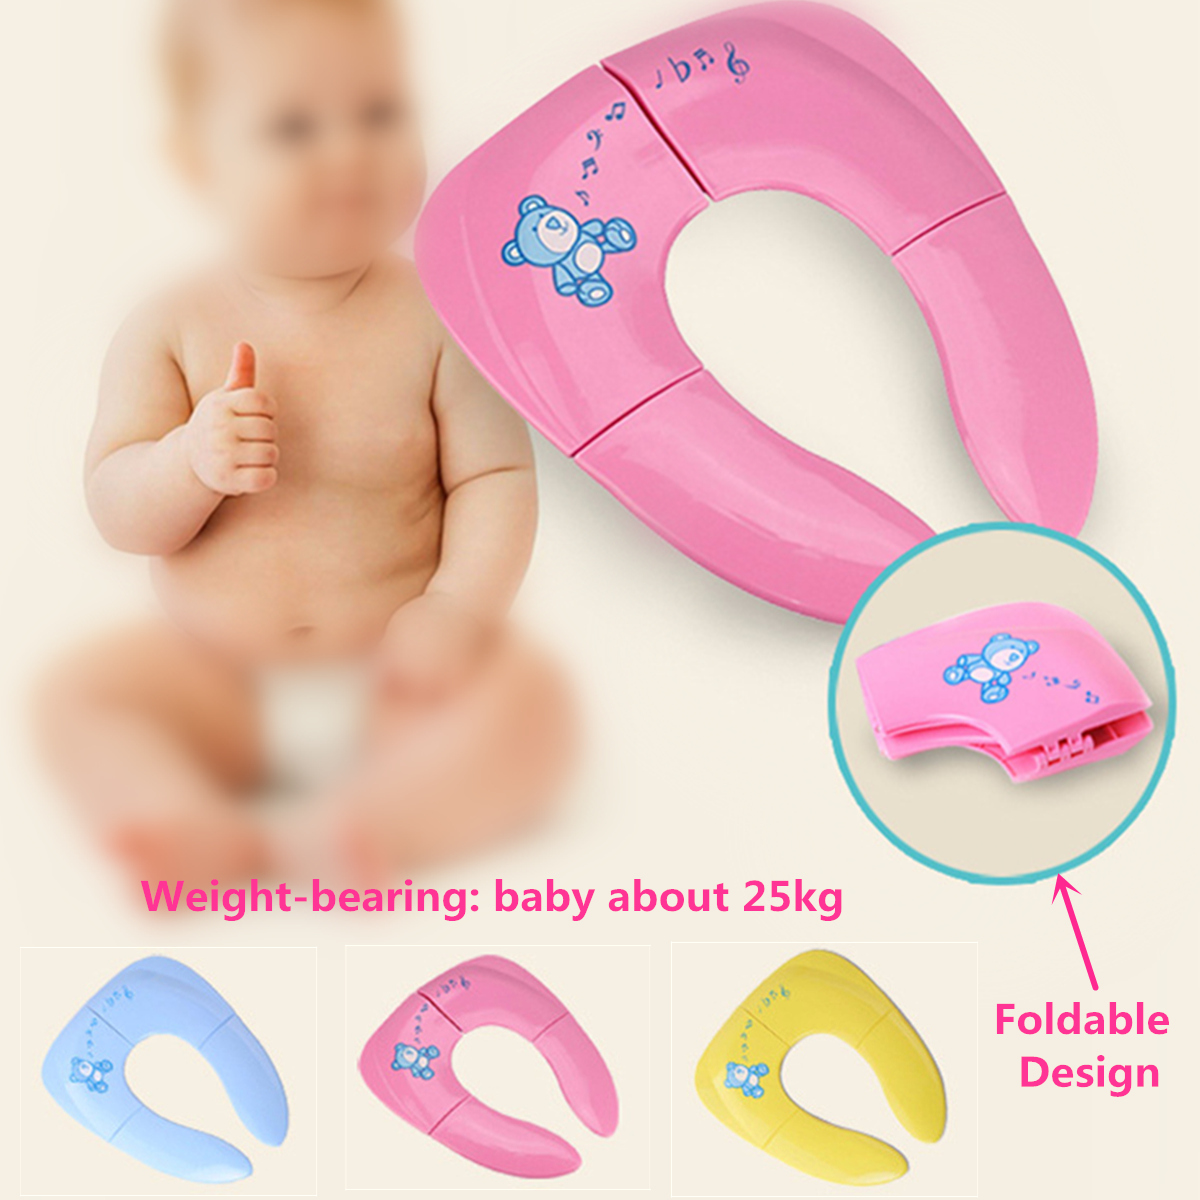 Portable-Foldable-Baby-Toddler-Potty-Toilet-Seat-Covers-Pad-Cushion-Training-Children-Kids-WC-1318247-1